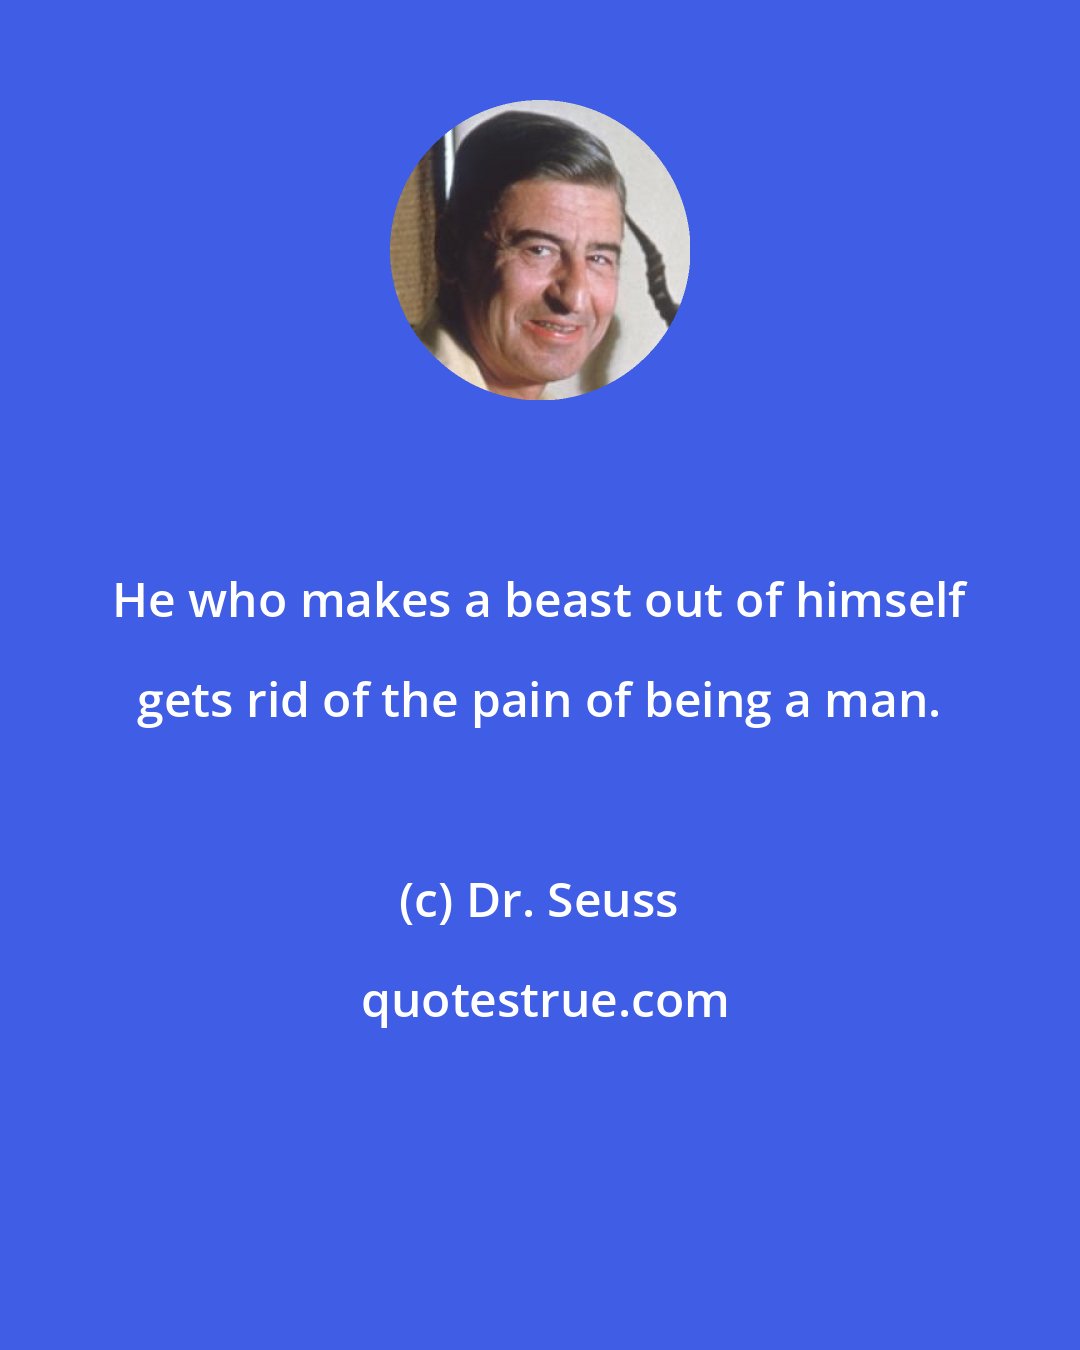 Dr. Seuss: He who makes a beast out of himself gets rid of the pain of being a man.